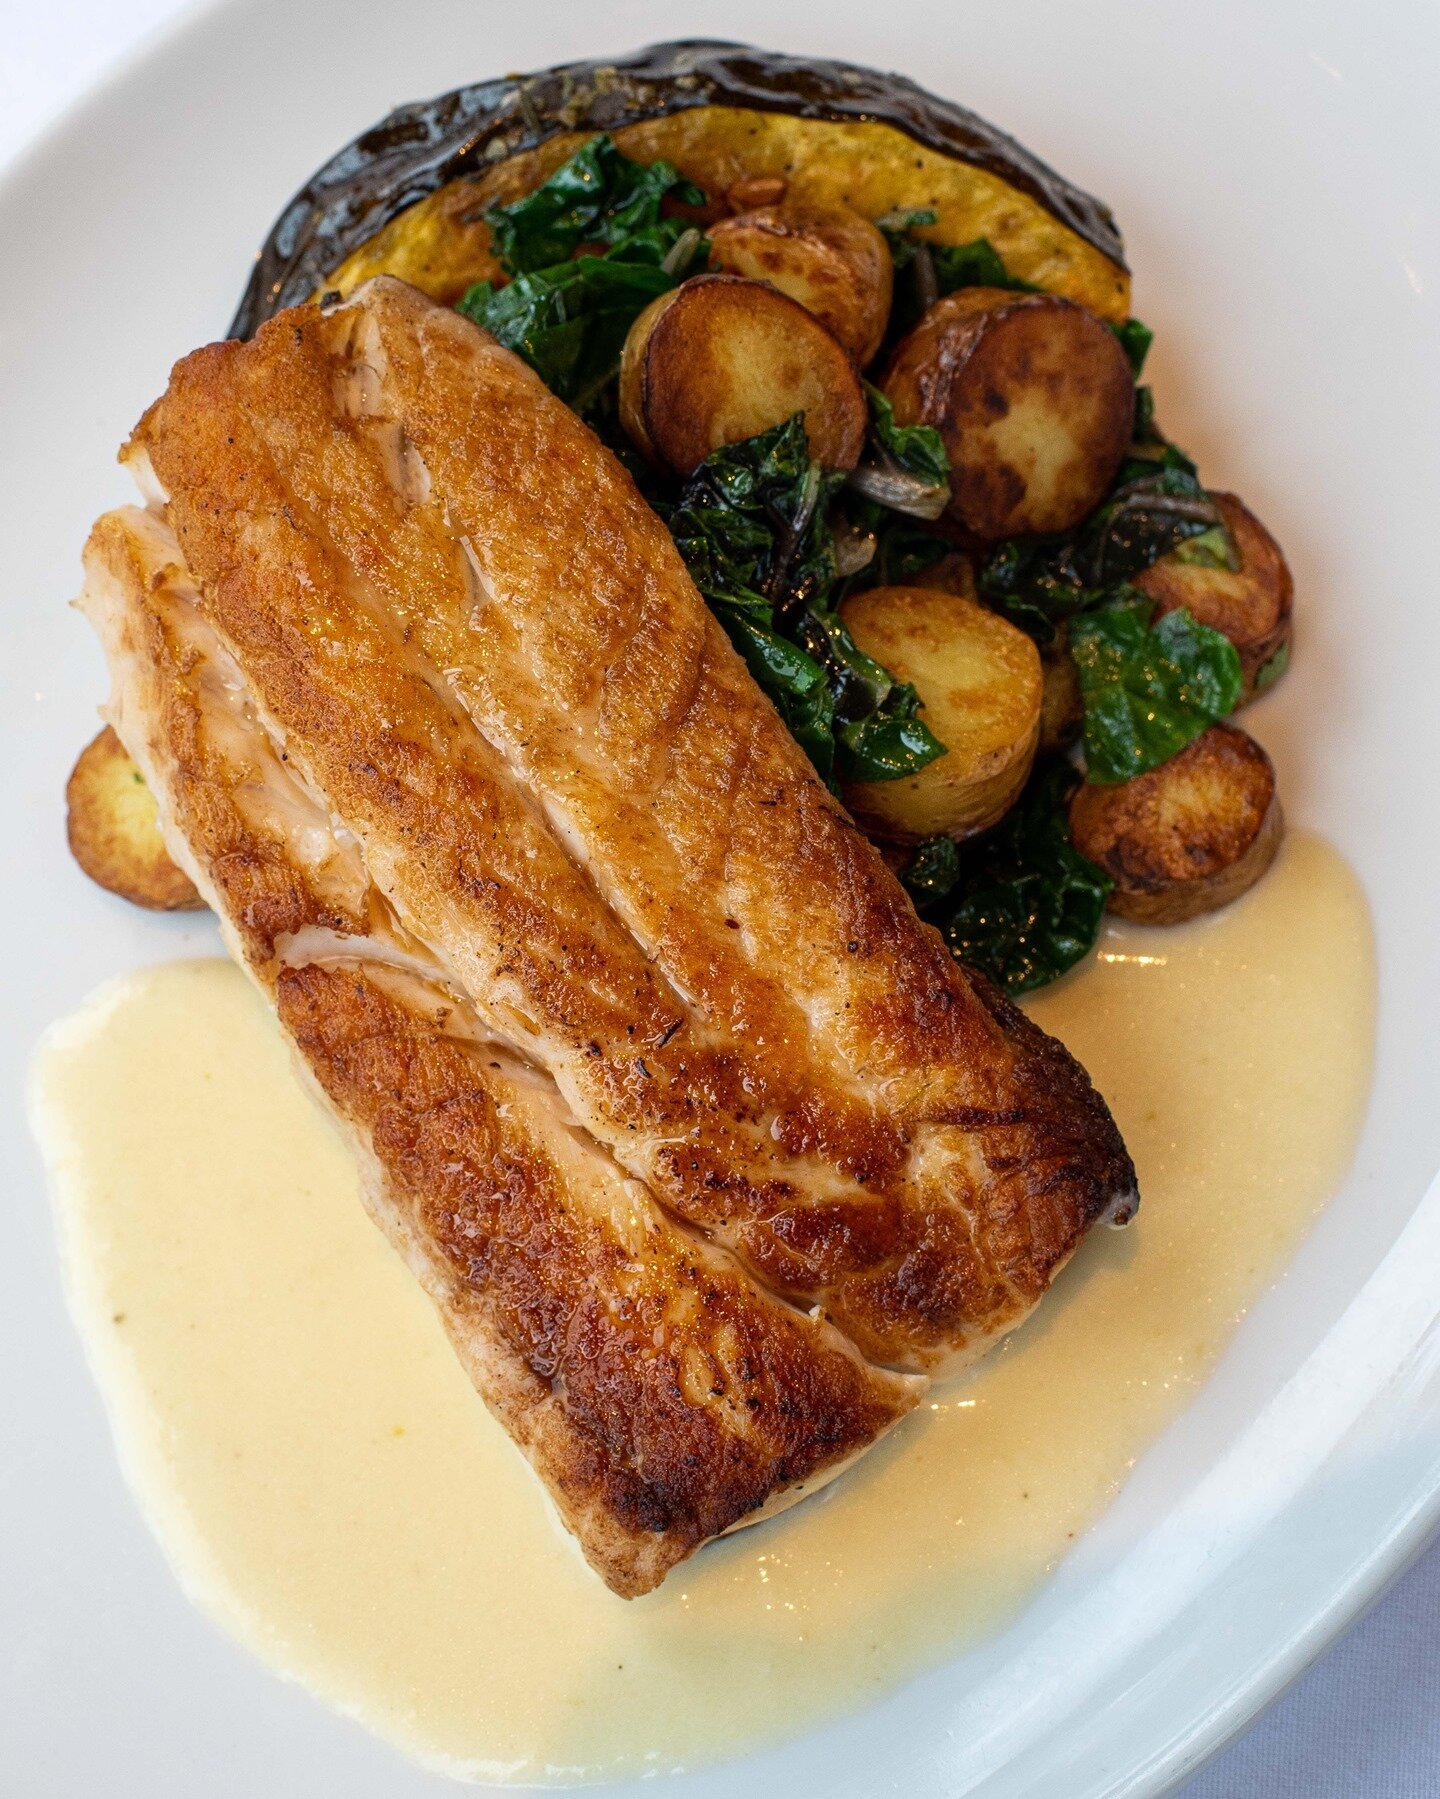 Featured Fish every week during Lent! 🐟⁠
⁠
This week:⁠
⁠
Striped Sea Bass from Virginia with roasted fingerling potatoes, Swiss chard, acorn squash, and Vidalia soubise.⁠
⁠
#special #fishspecial #featuredfish #fishfriday #fishfry #lentspecials #lent